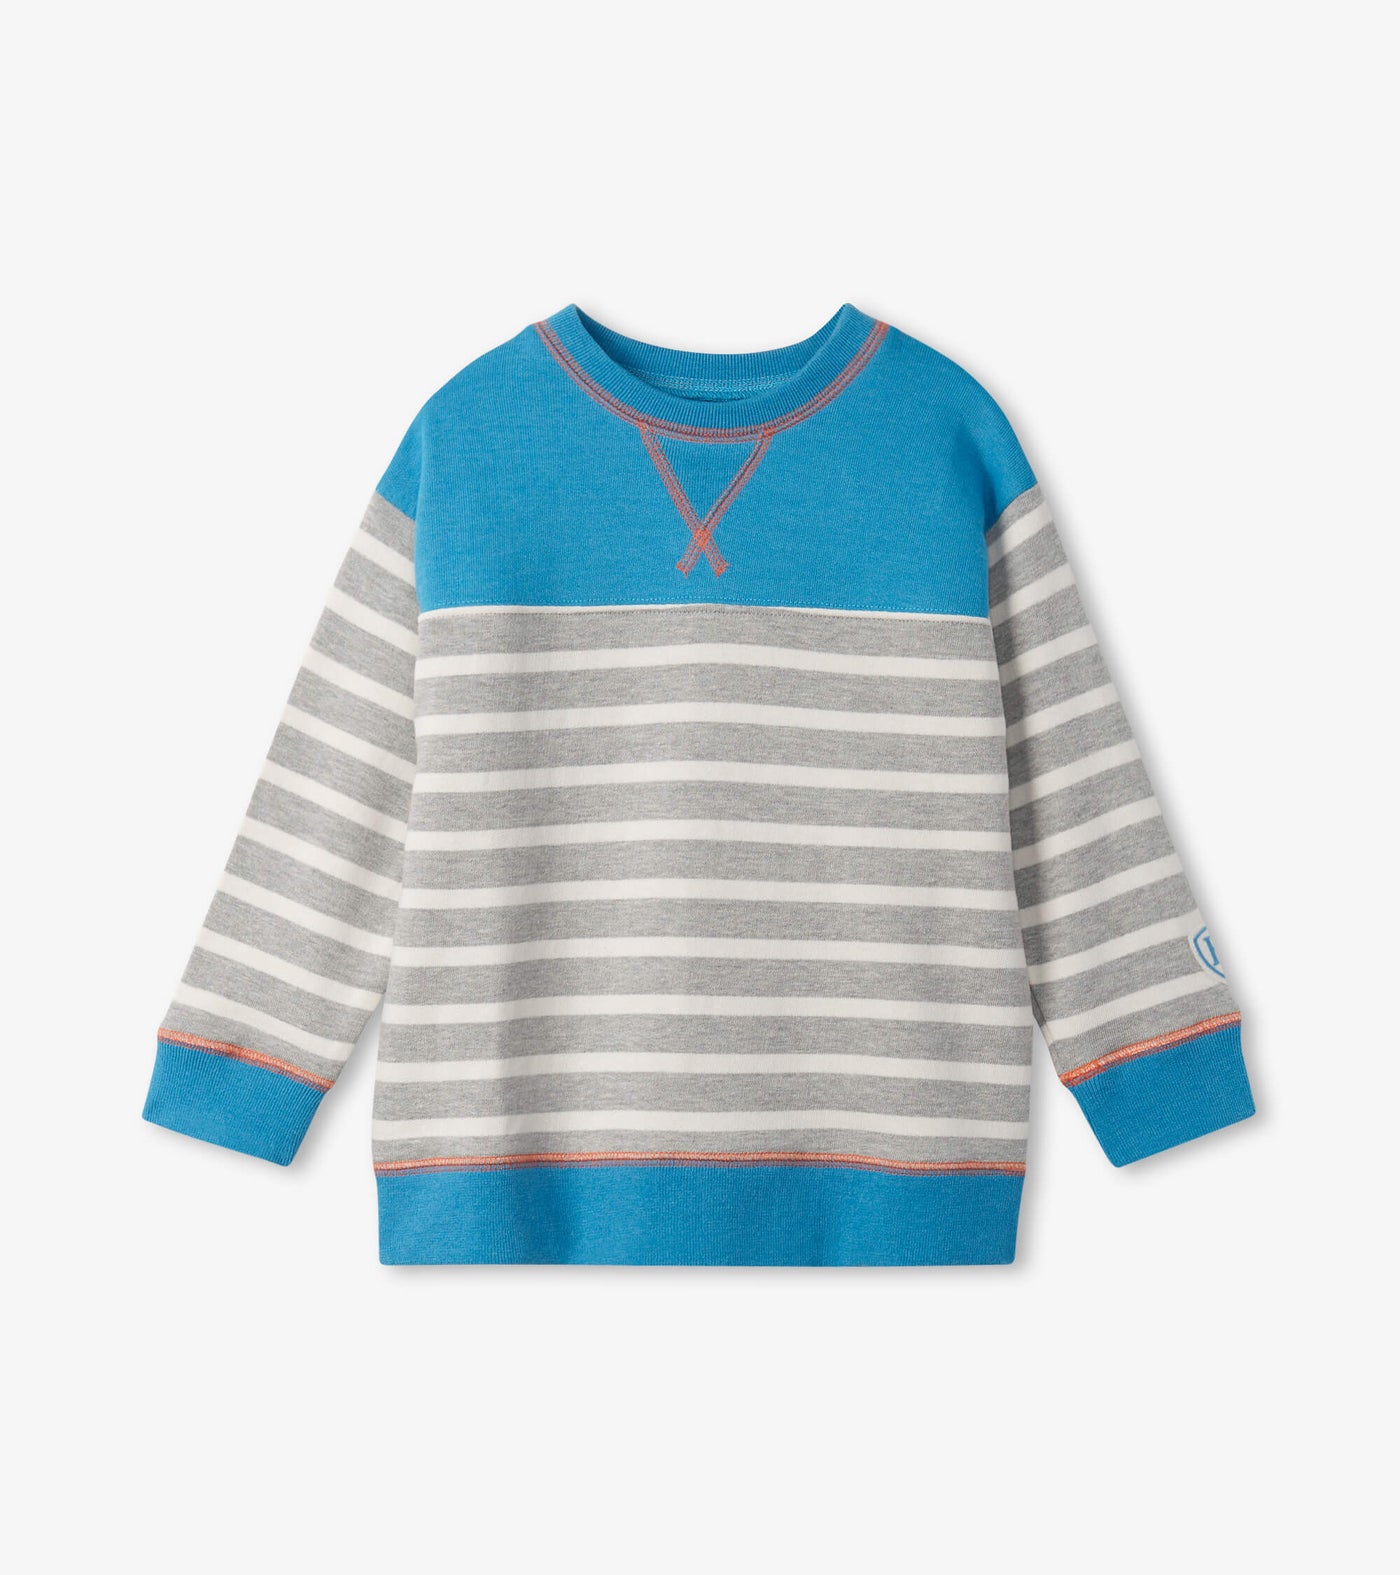 Back to School Stripes Pullover